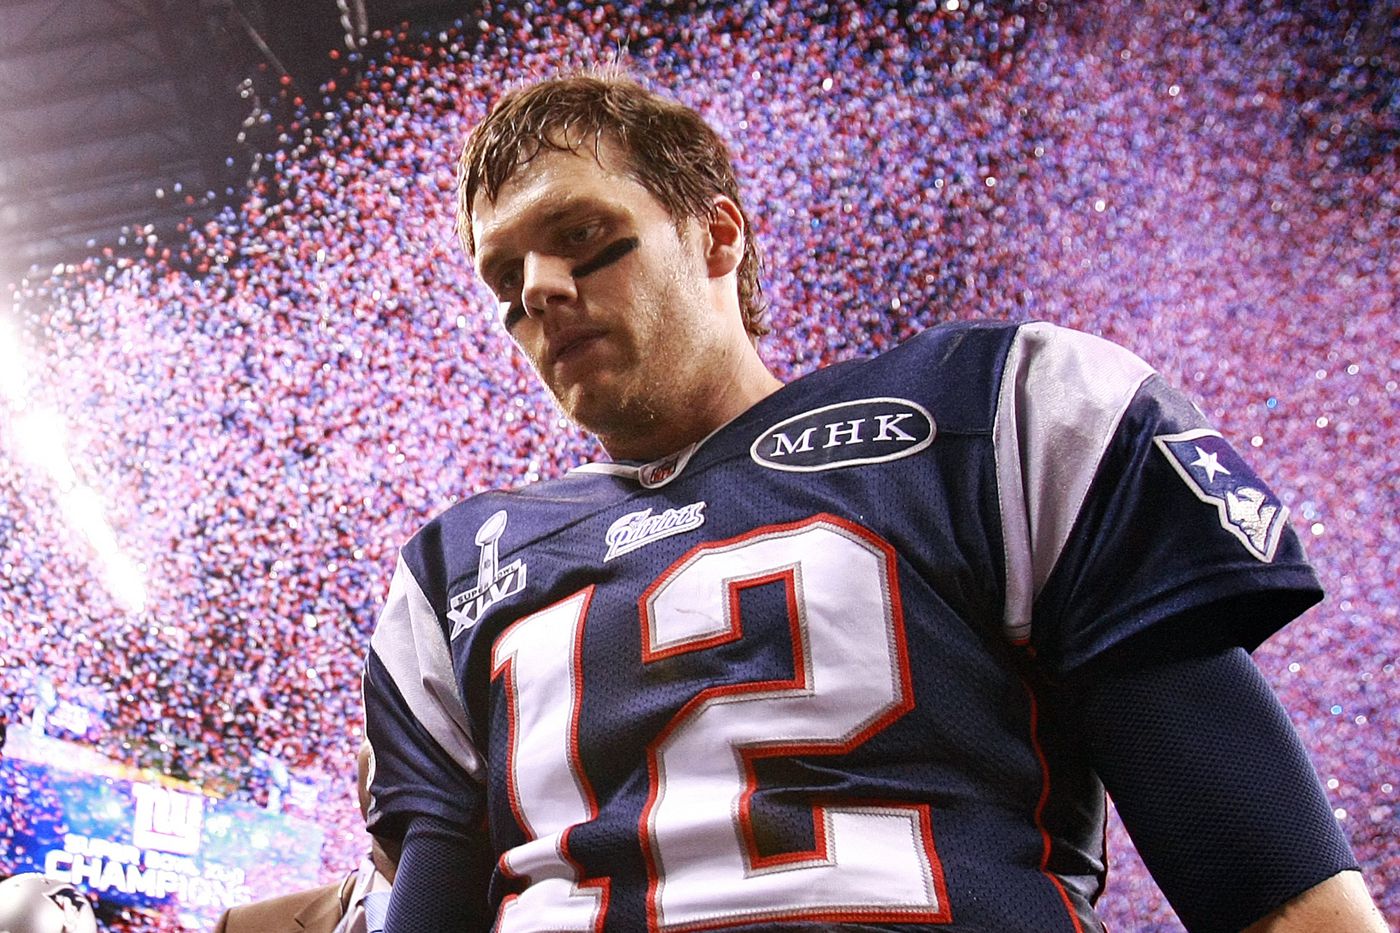 Ranking the Patriots' Super Bowl losses from least to most